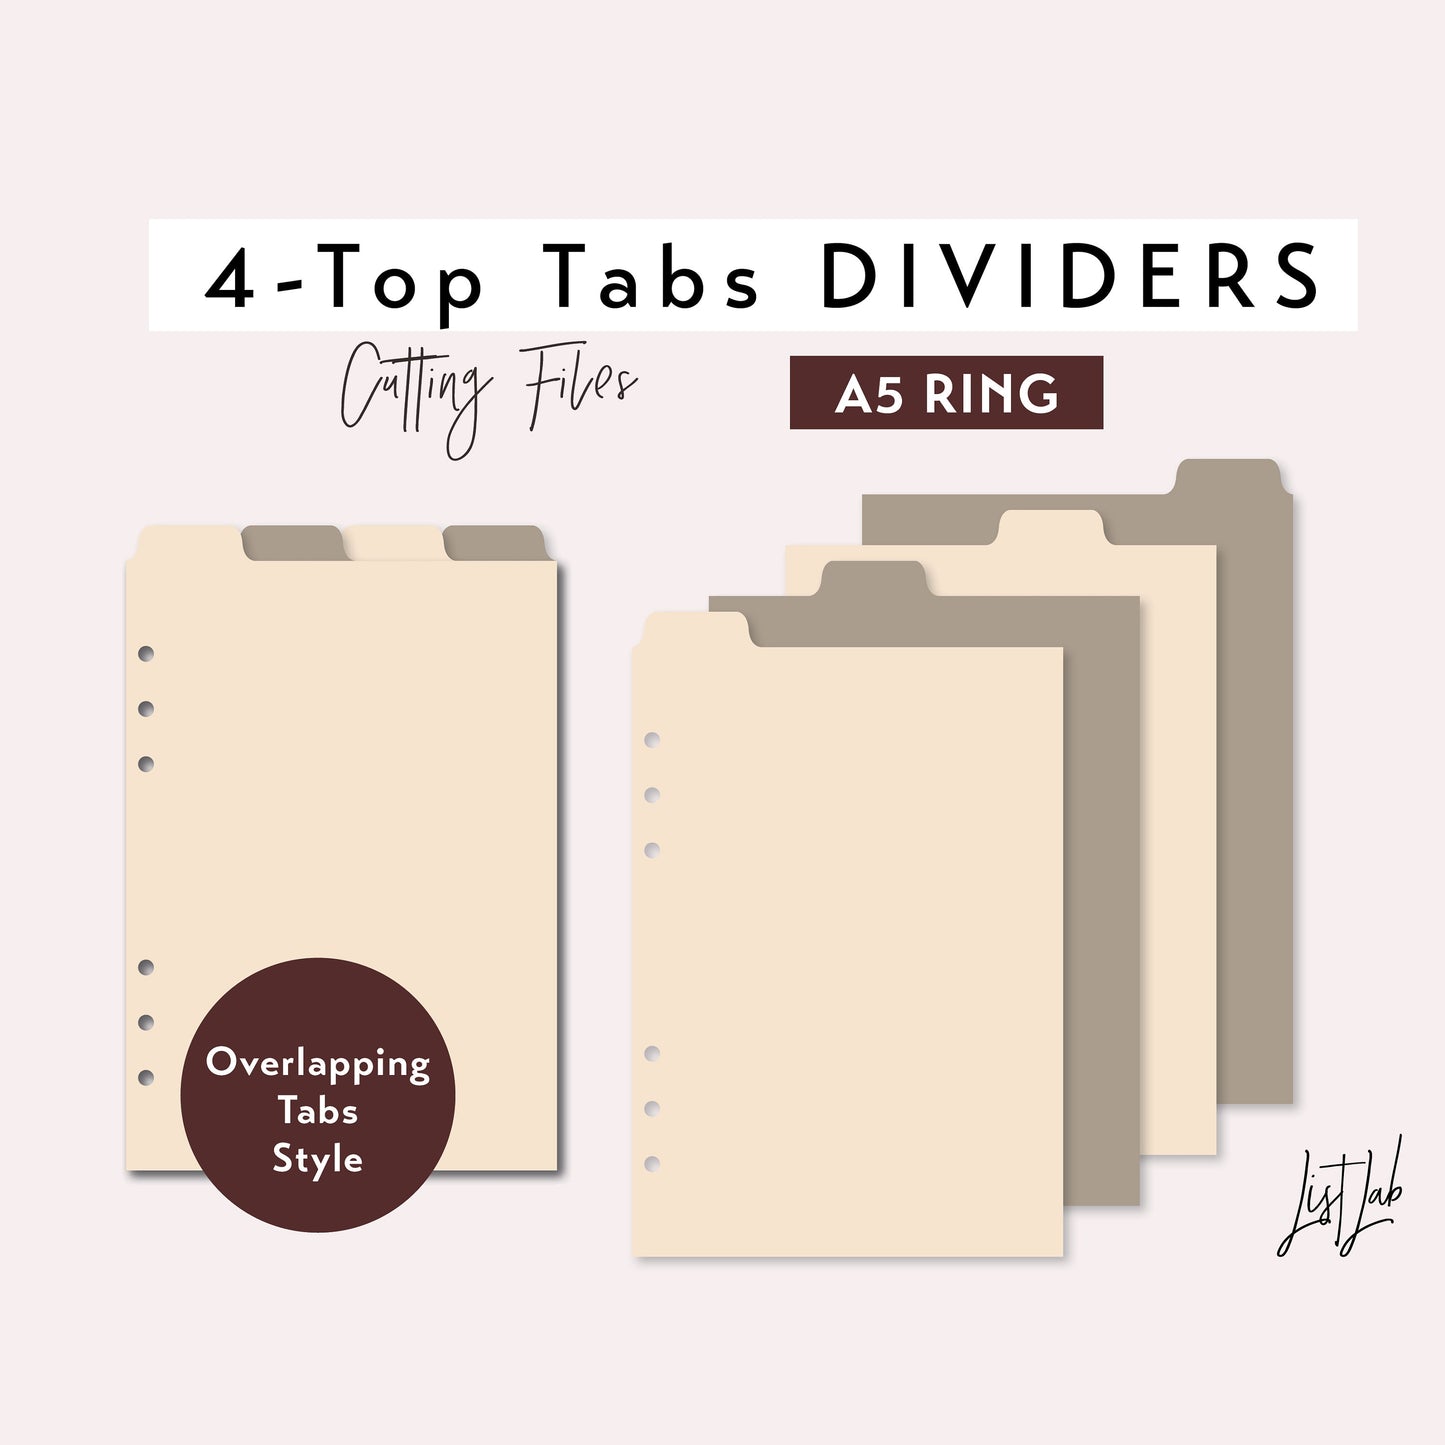 A5 Ring 4 TOP TAB DIVIDERS Cutting Files Set